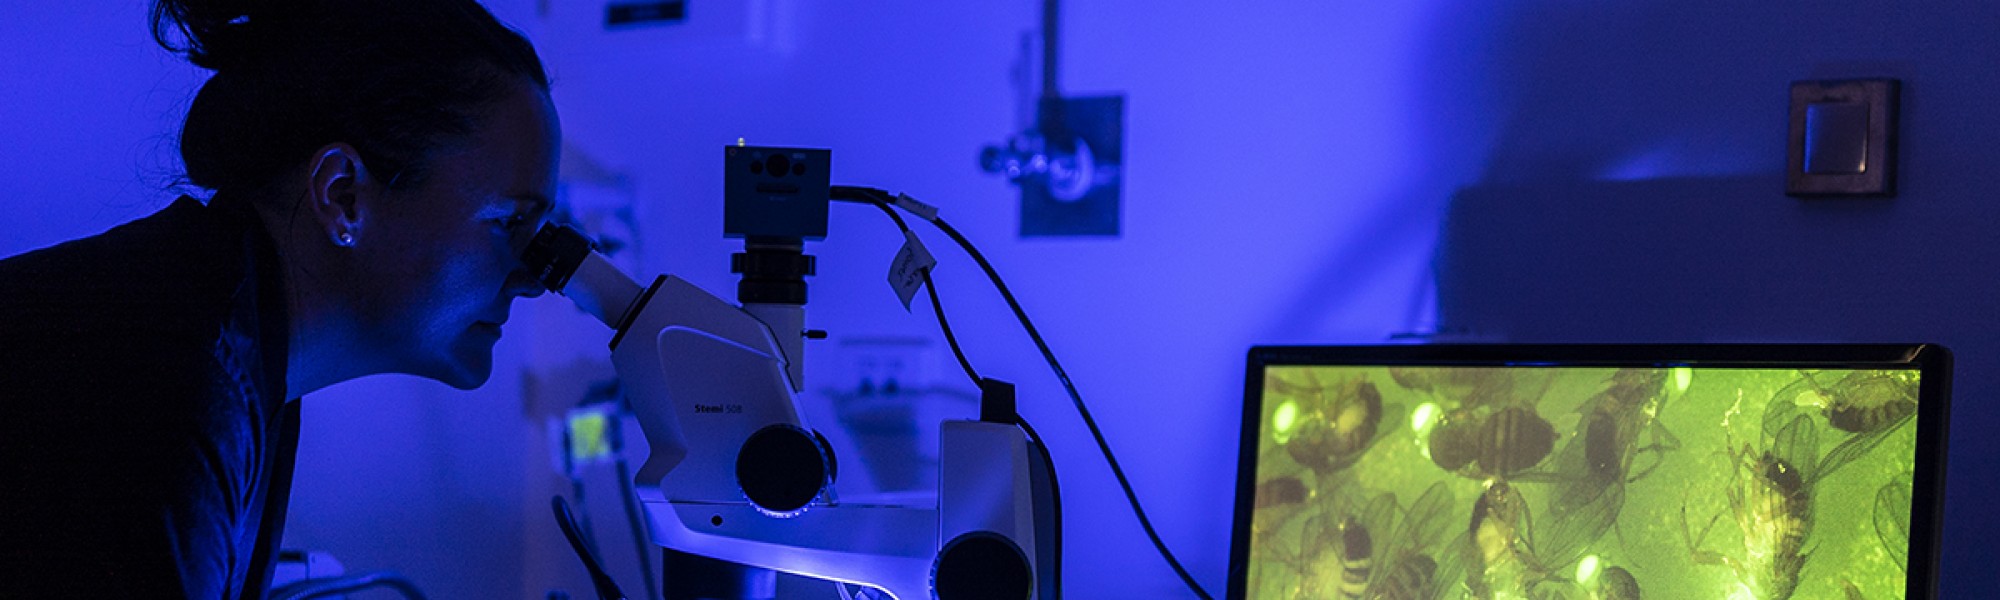 Female researcher looking into microscope with a screen on the right showing fruit flies